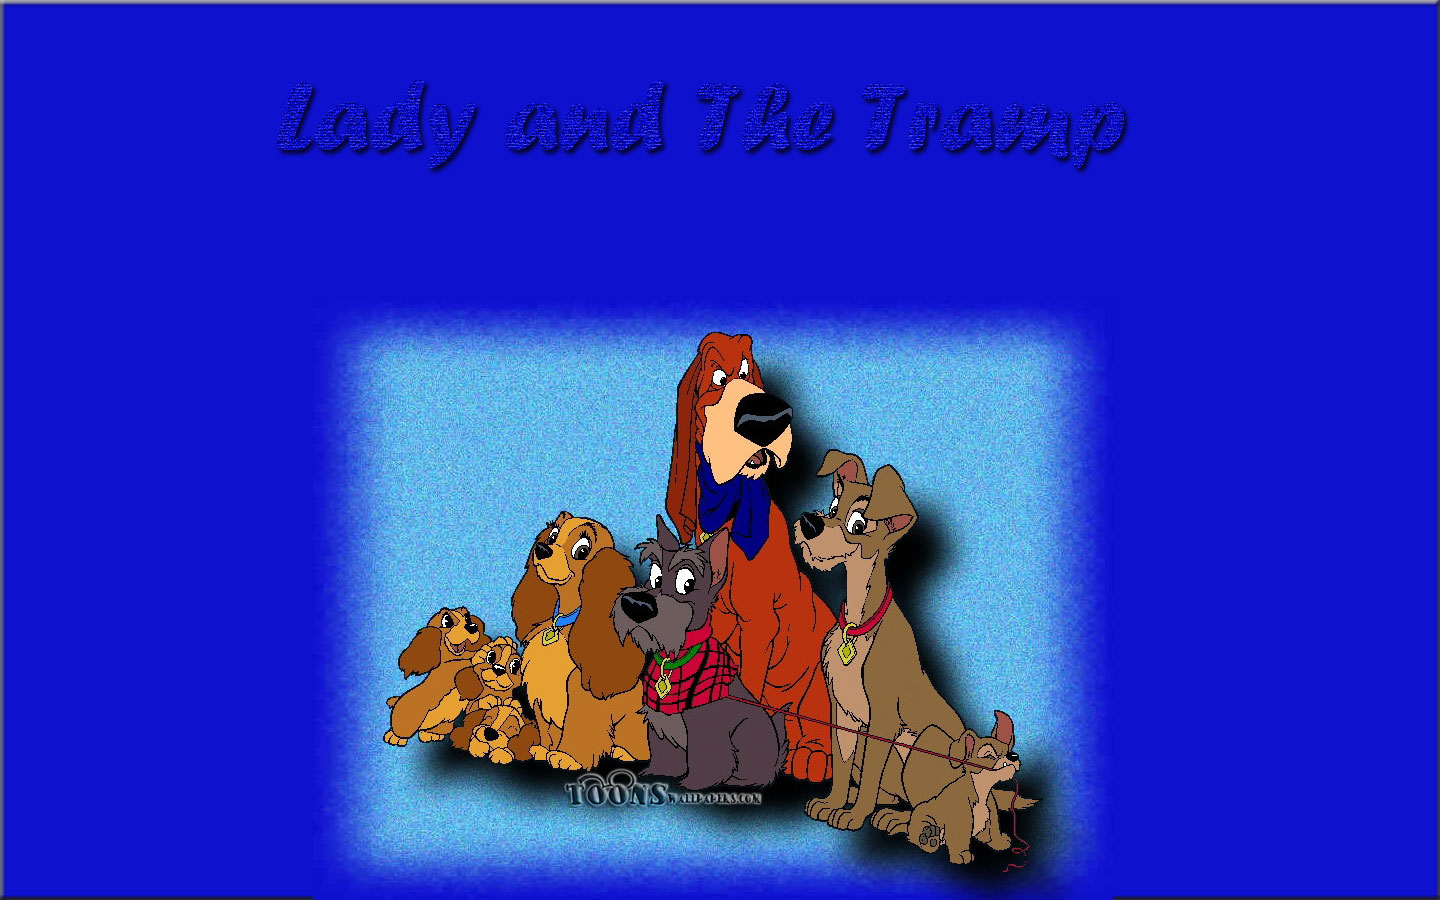 scamp (lady and the tramp), movie, lady and the tramp (1955), annette (lady and the tramp), collette (lady and the tramp), danielle (lady and the tramp), jock (lady and the tramp), lady (lady and the tramp), lady and the tramp, tramp (lady and the tramp), trusty (lady and the tramp)